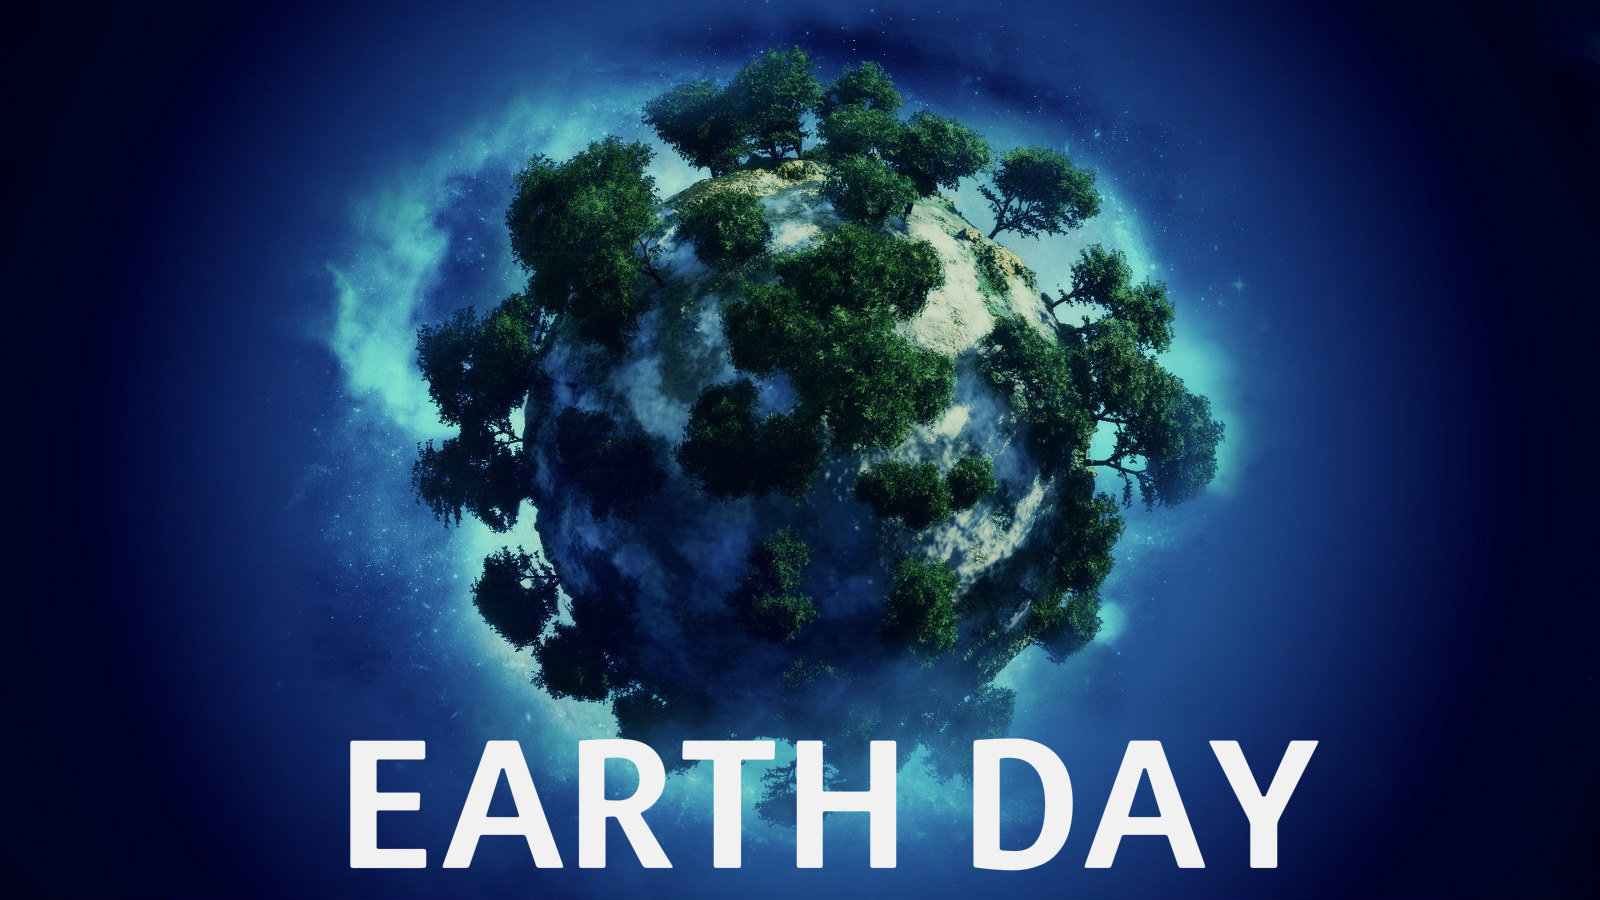 April Happy Earth Day HD Wallpapers For Desktop Most HD Wallpapers